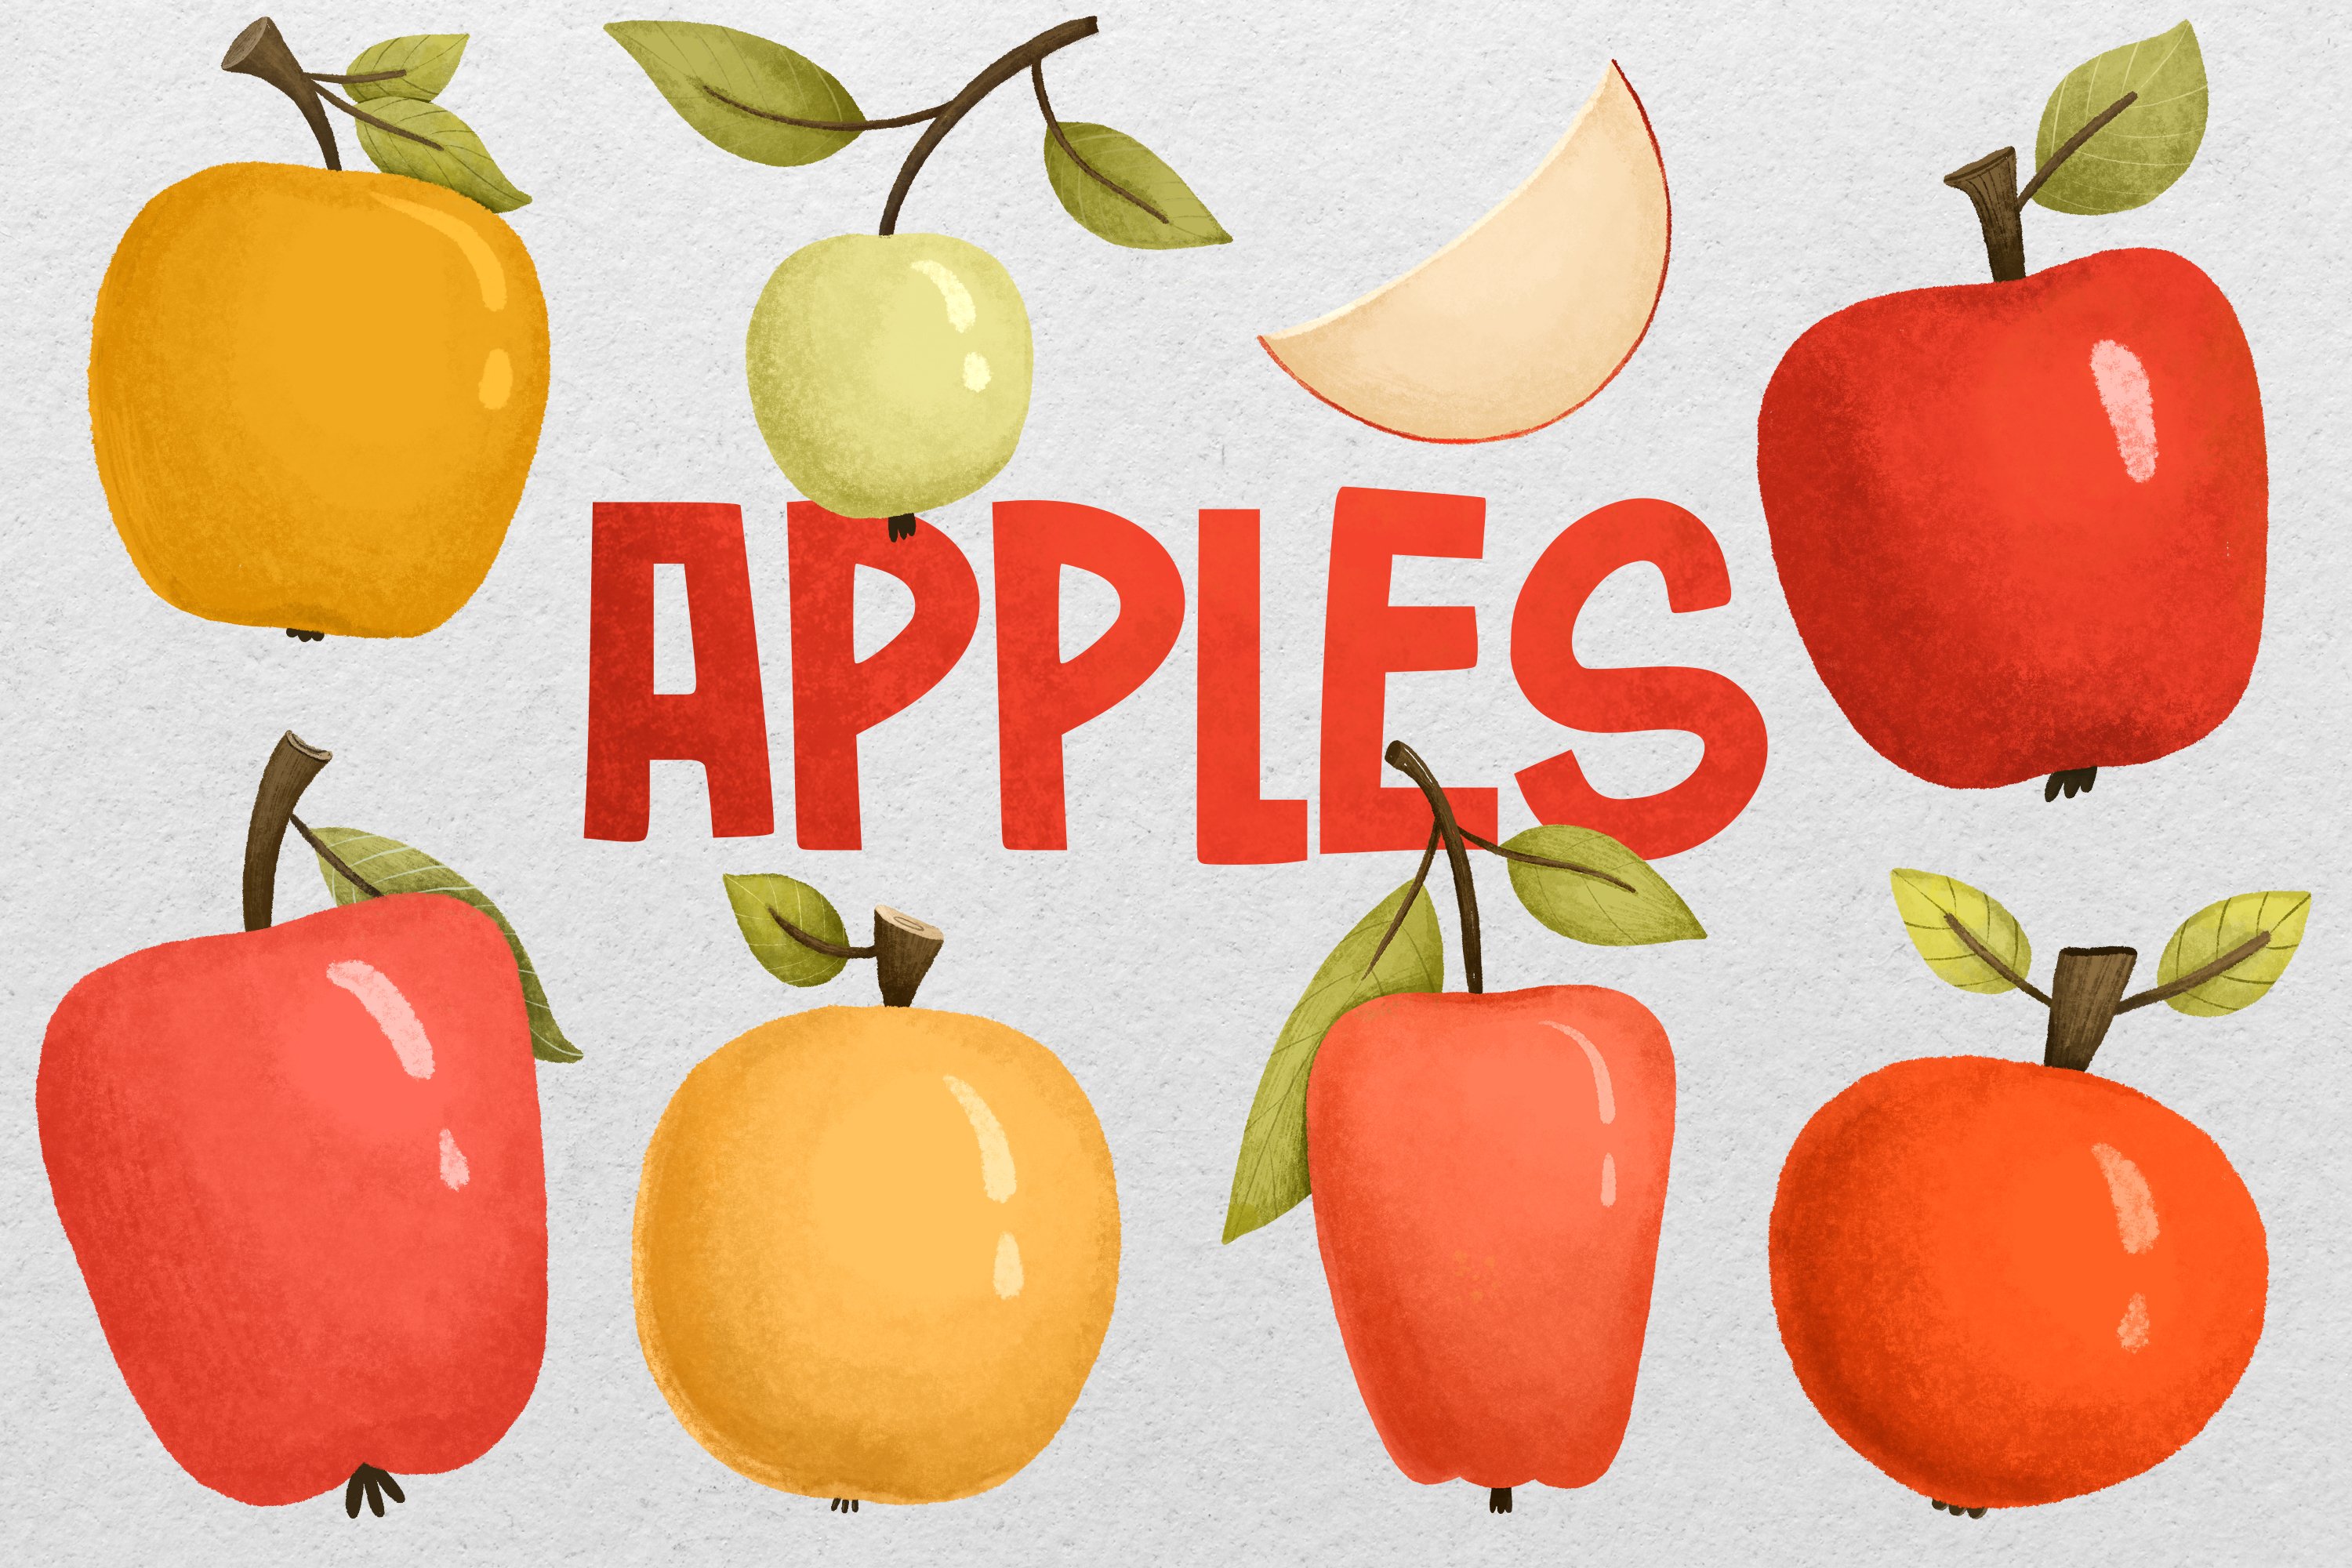 The title of the set of apples.